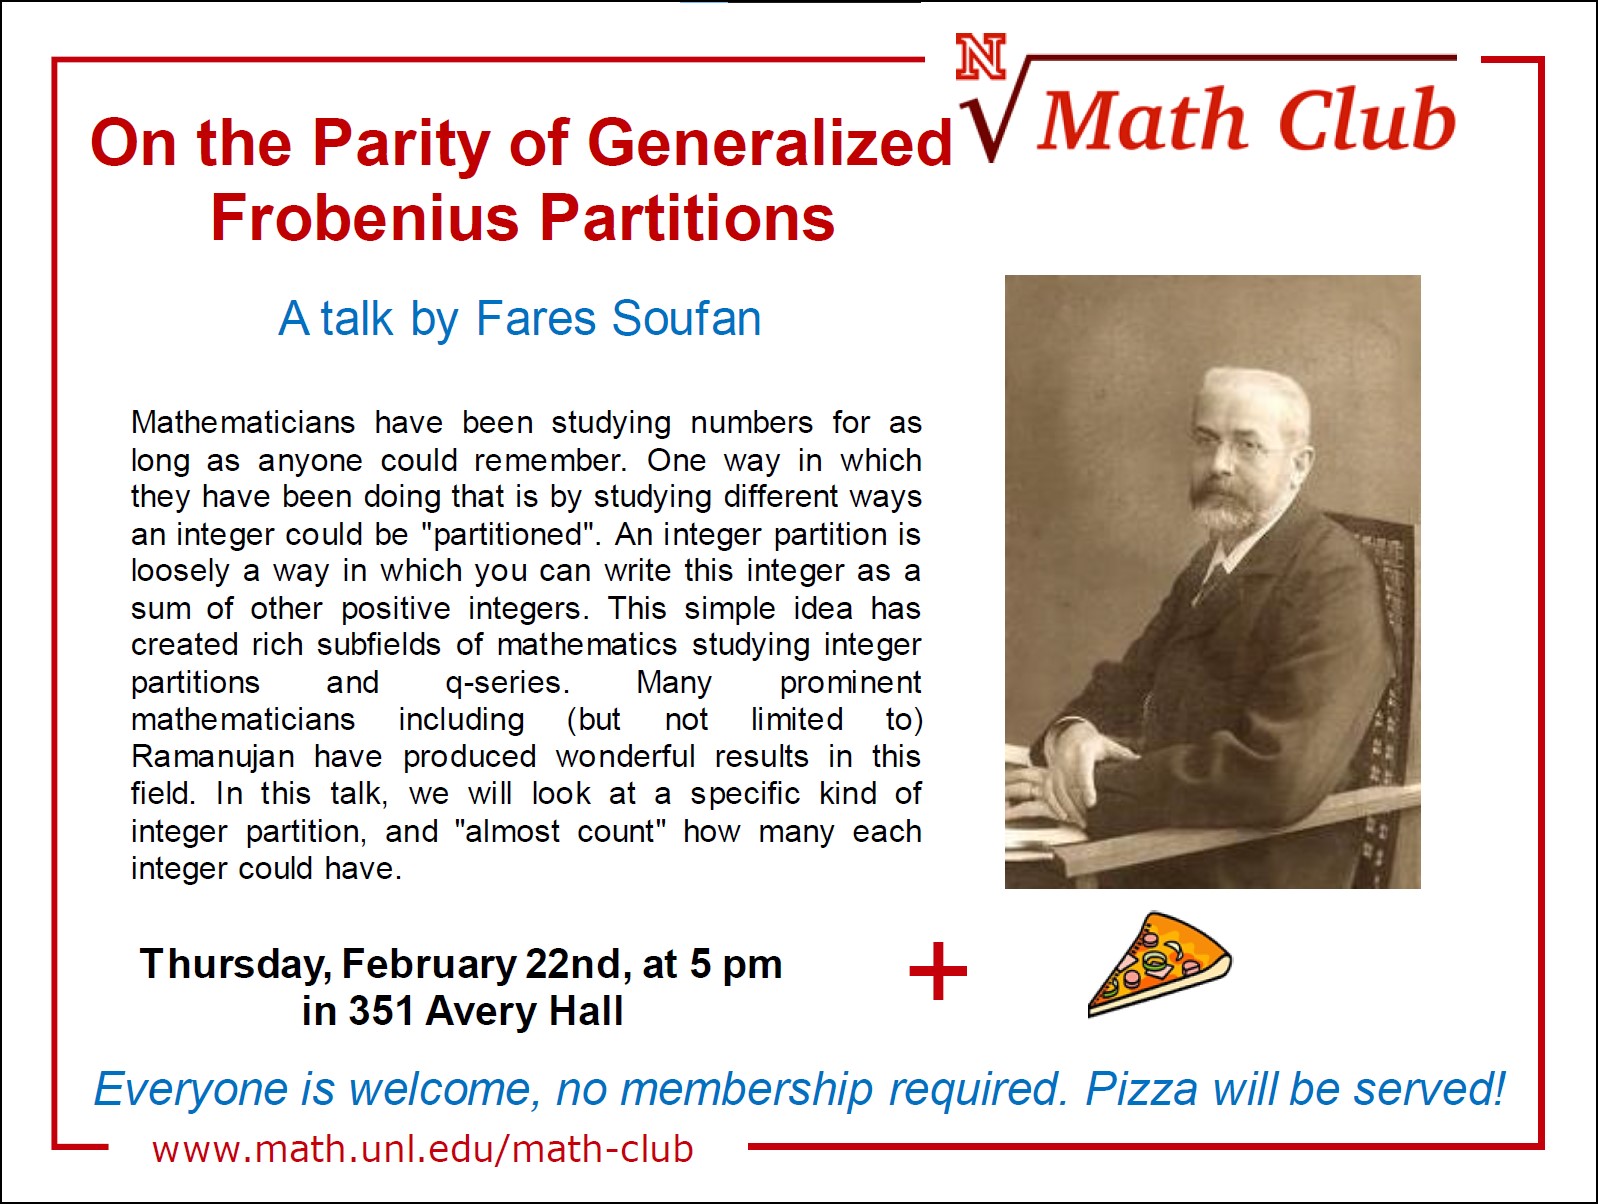 Math Club - On the Parity of Generalized Frobenius Partitions